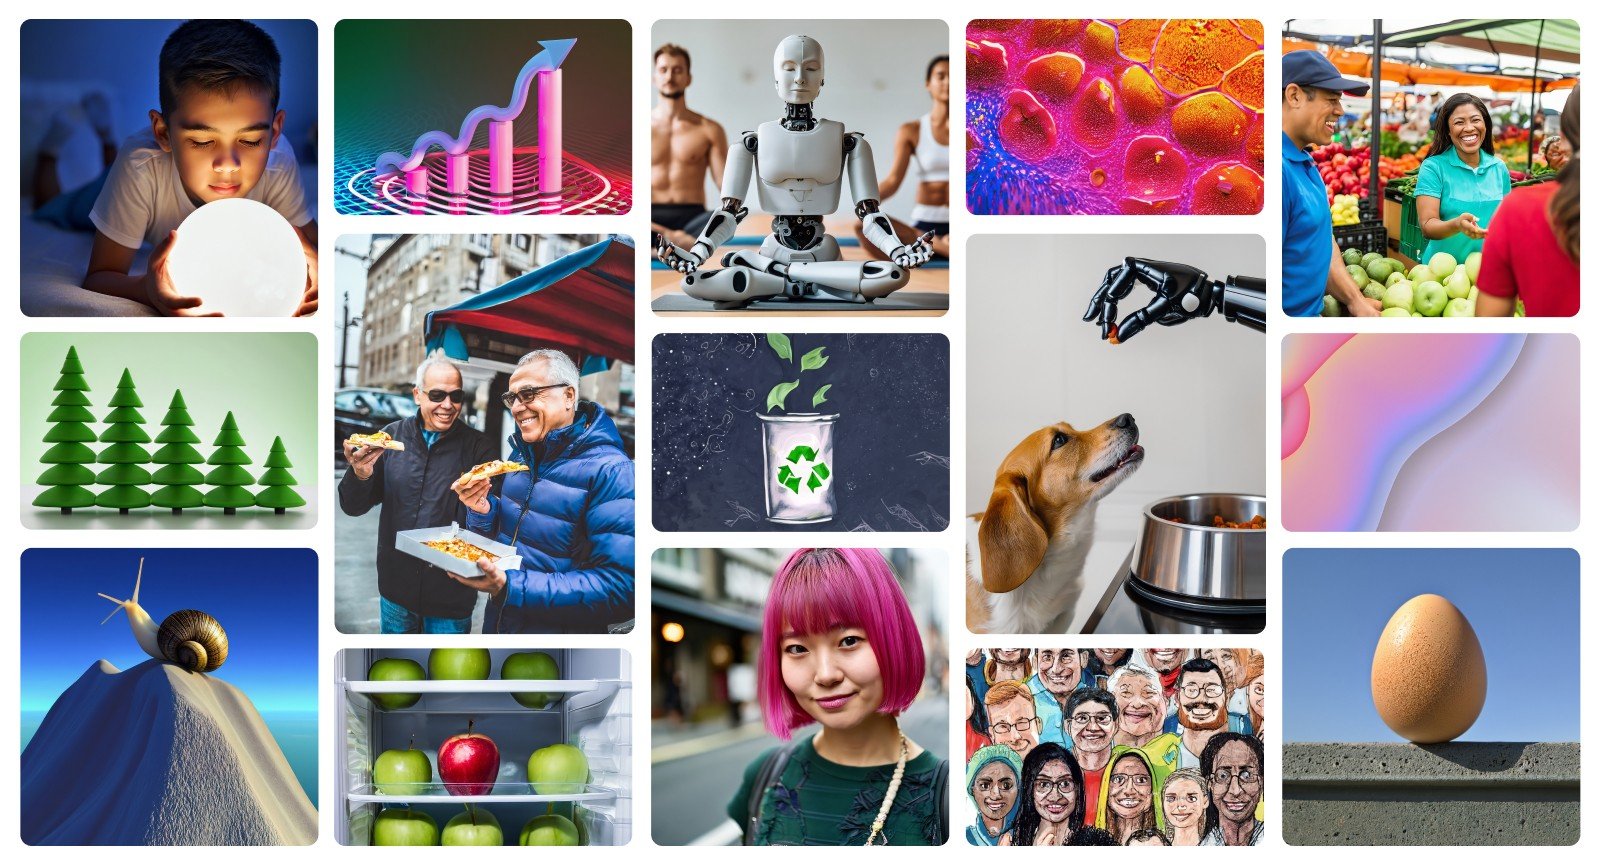 Getty launches another AI-generated service with iStock